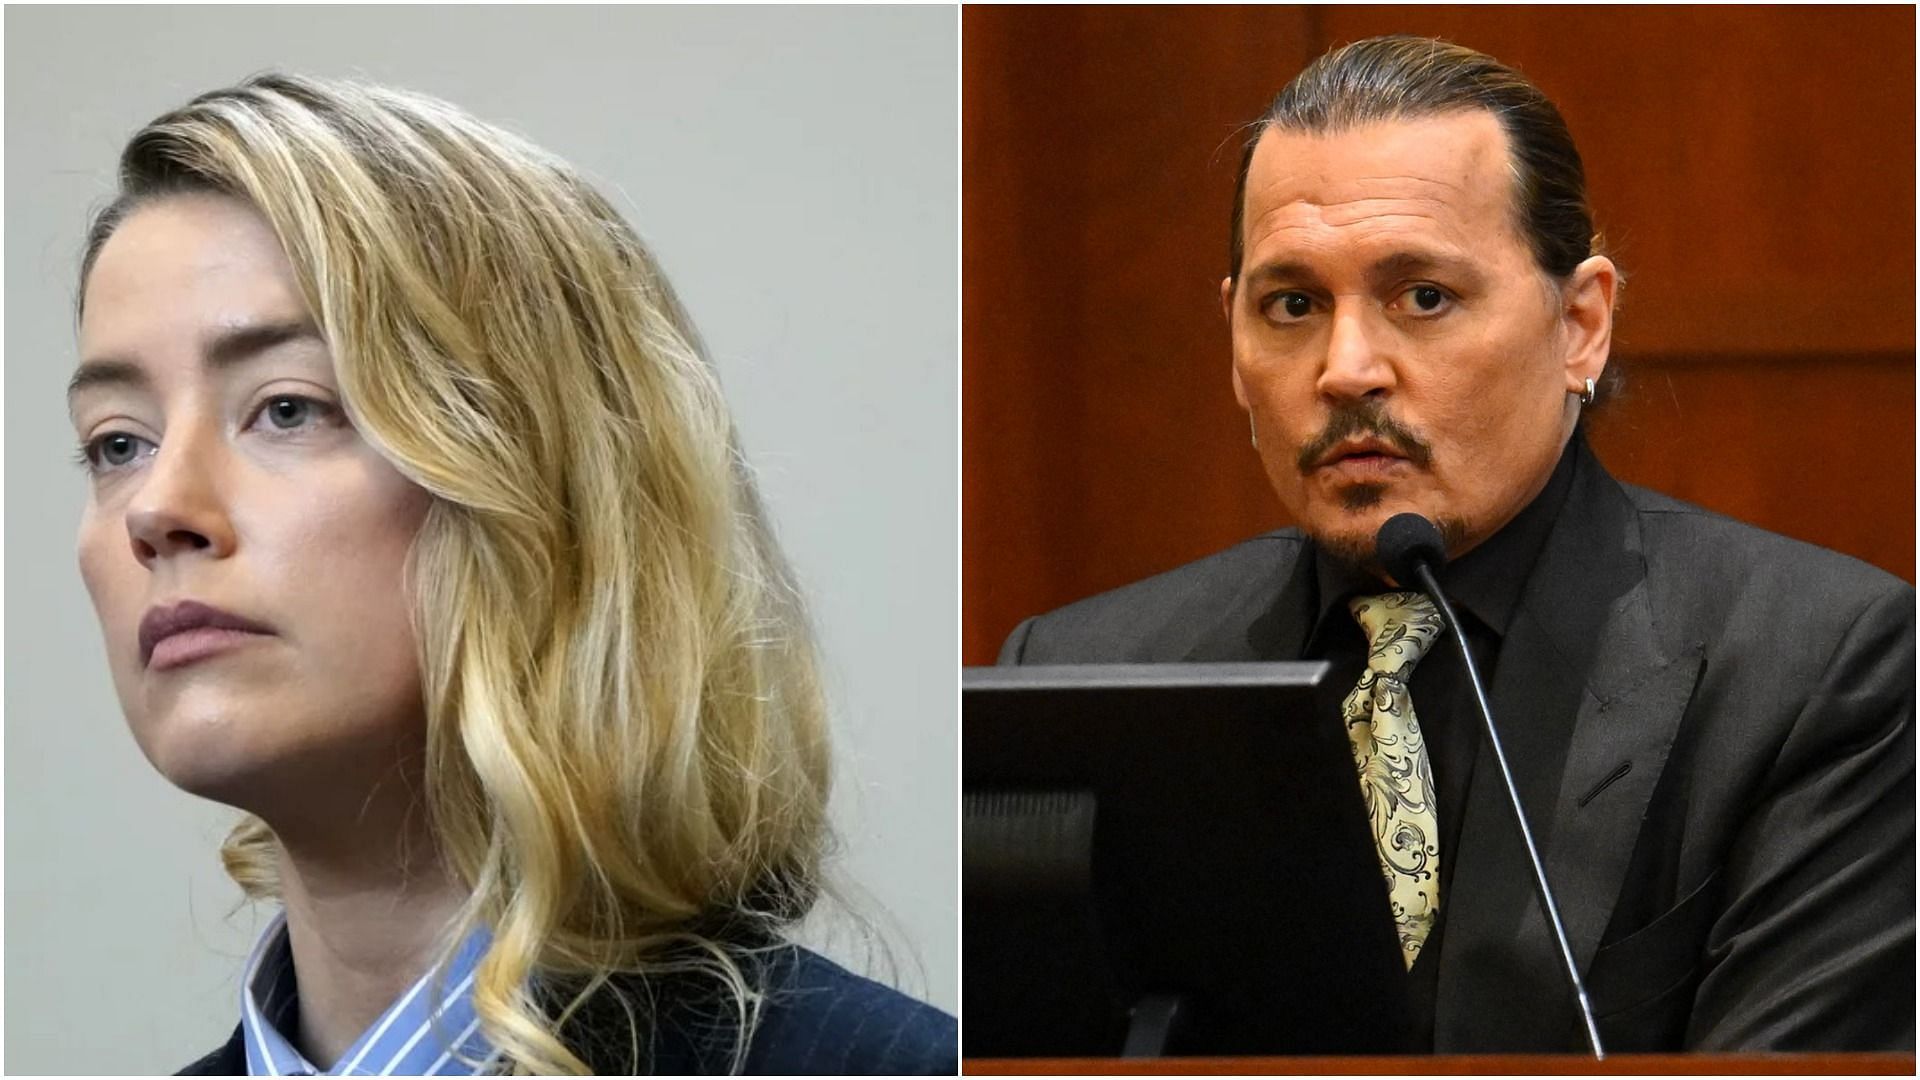 Amber Heard and Johnny Depp in the court (Image via Elizabeth Frantz and Jim Watson/AFP/Getty Images)